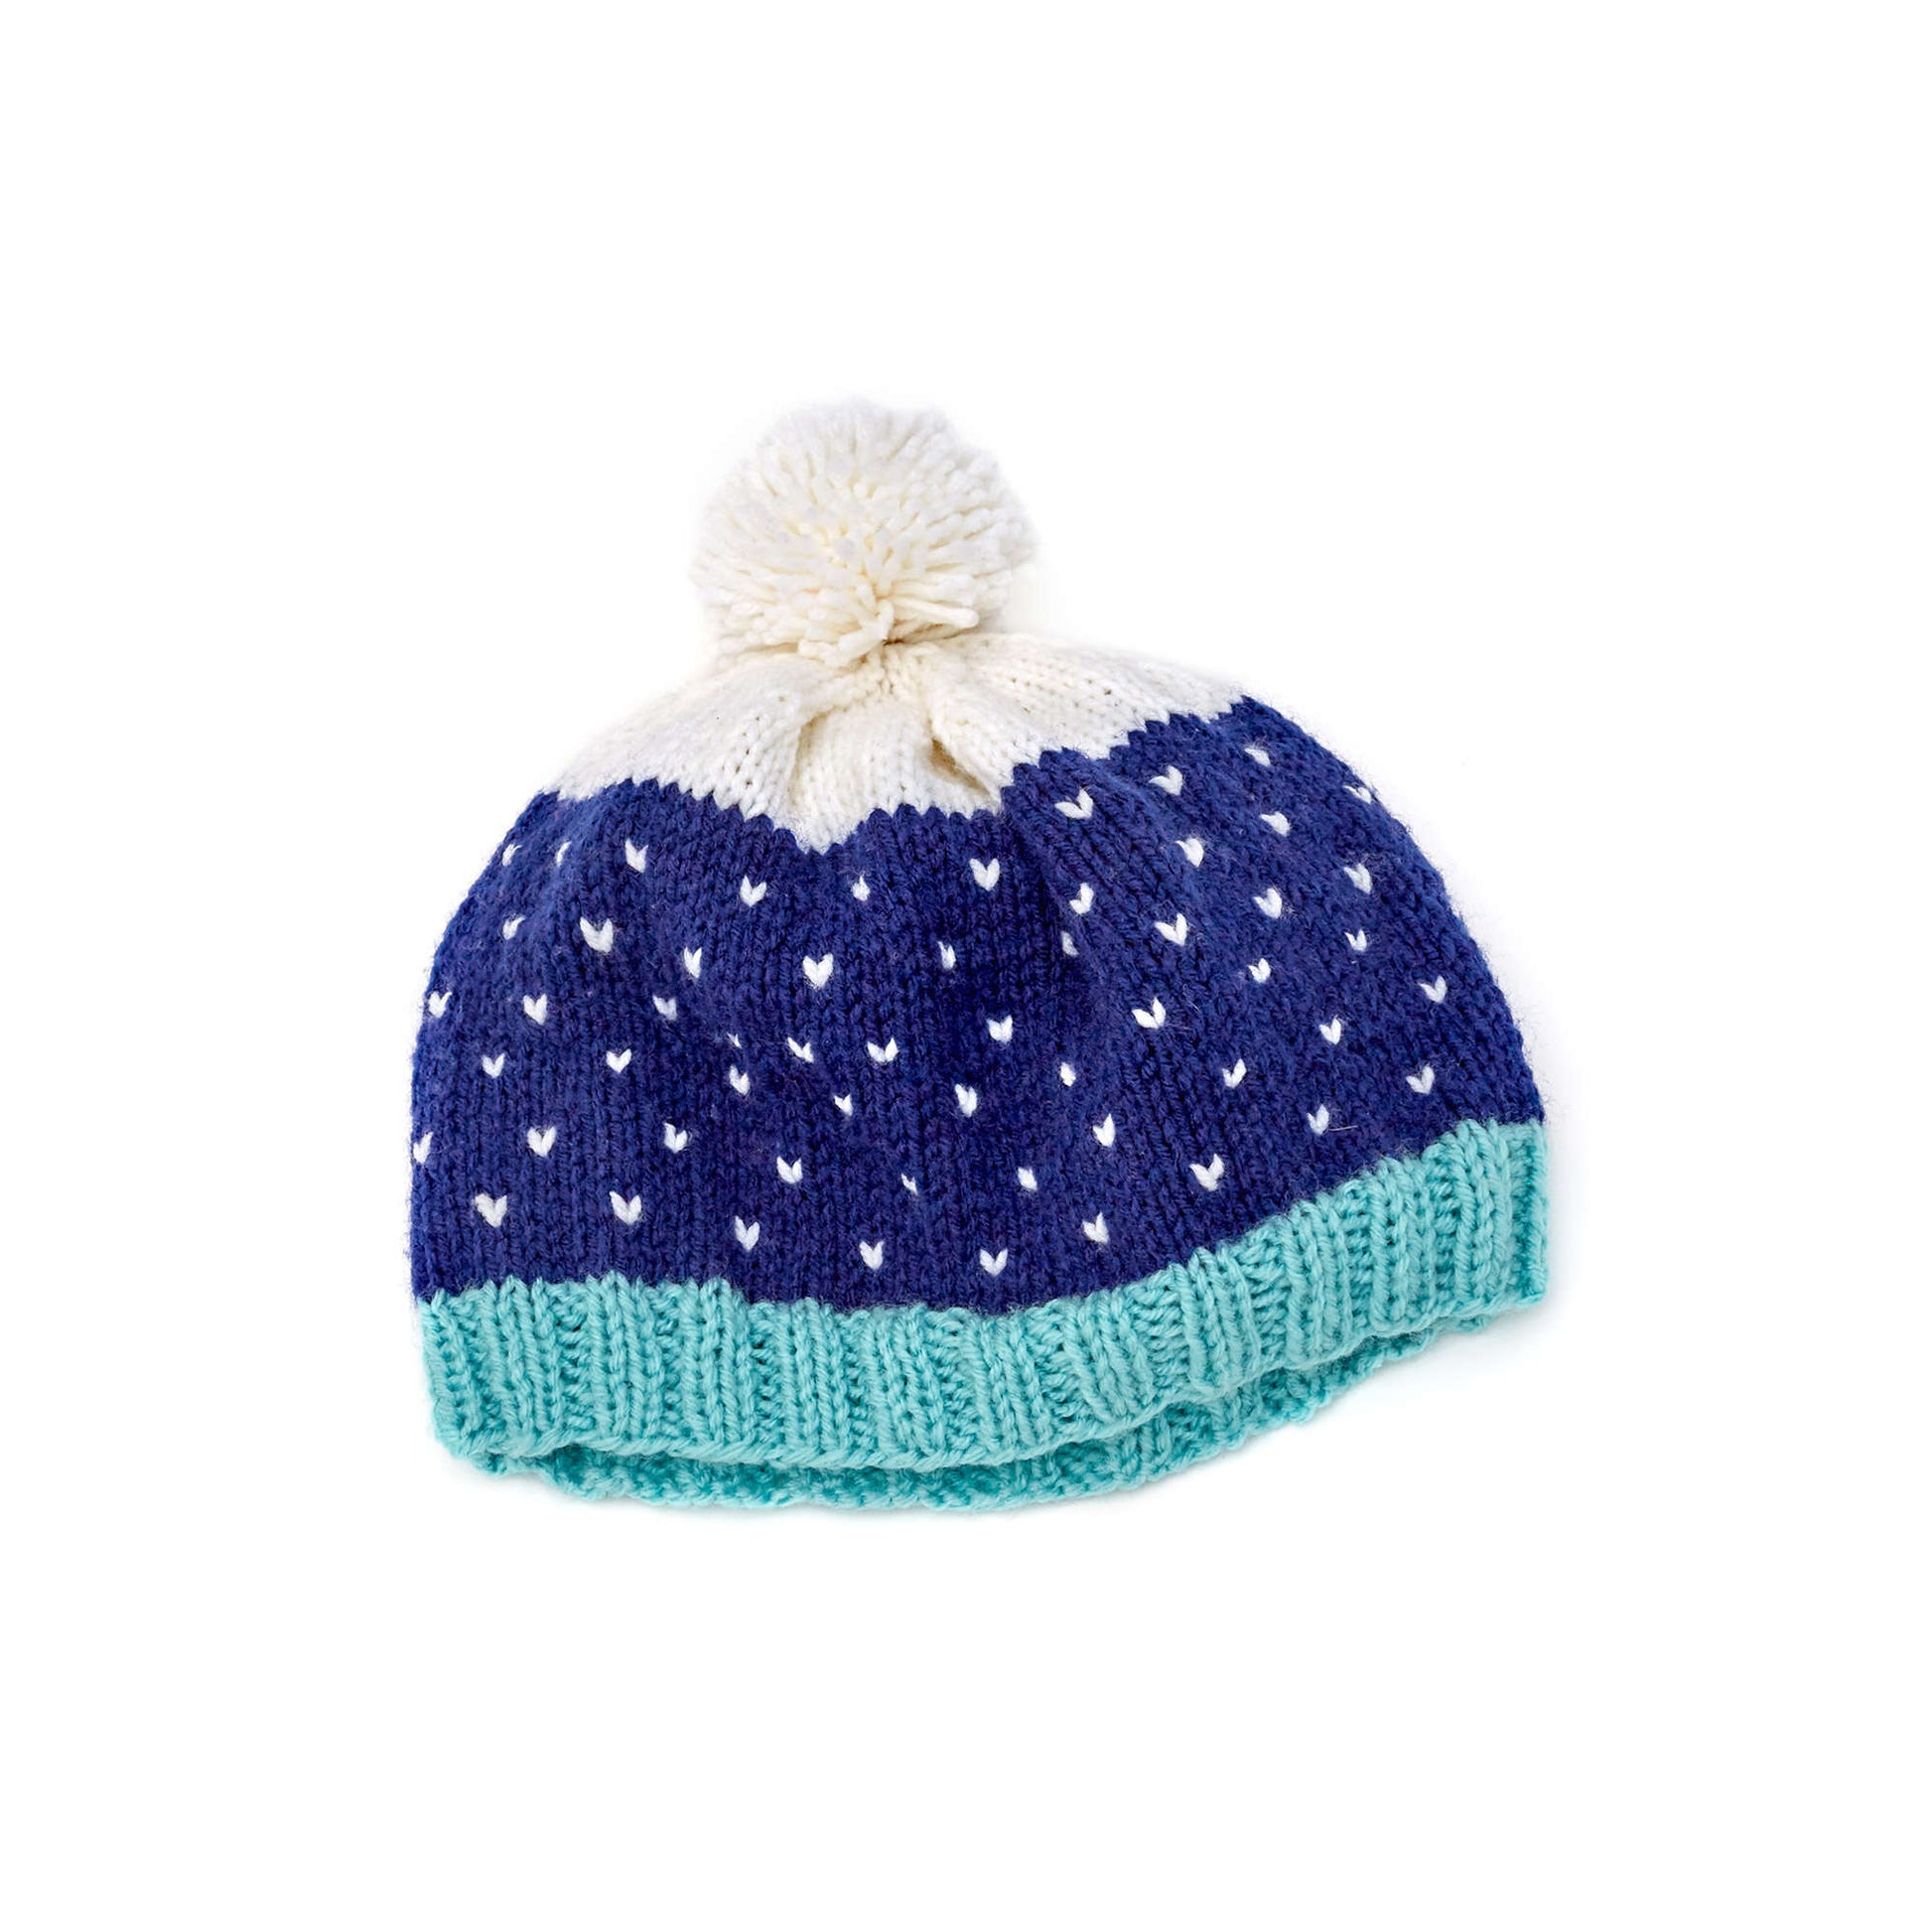 Free Red Heart Knit Snow-Speckled Hat Pattern